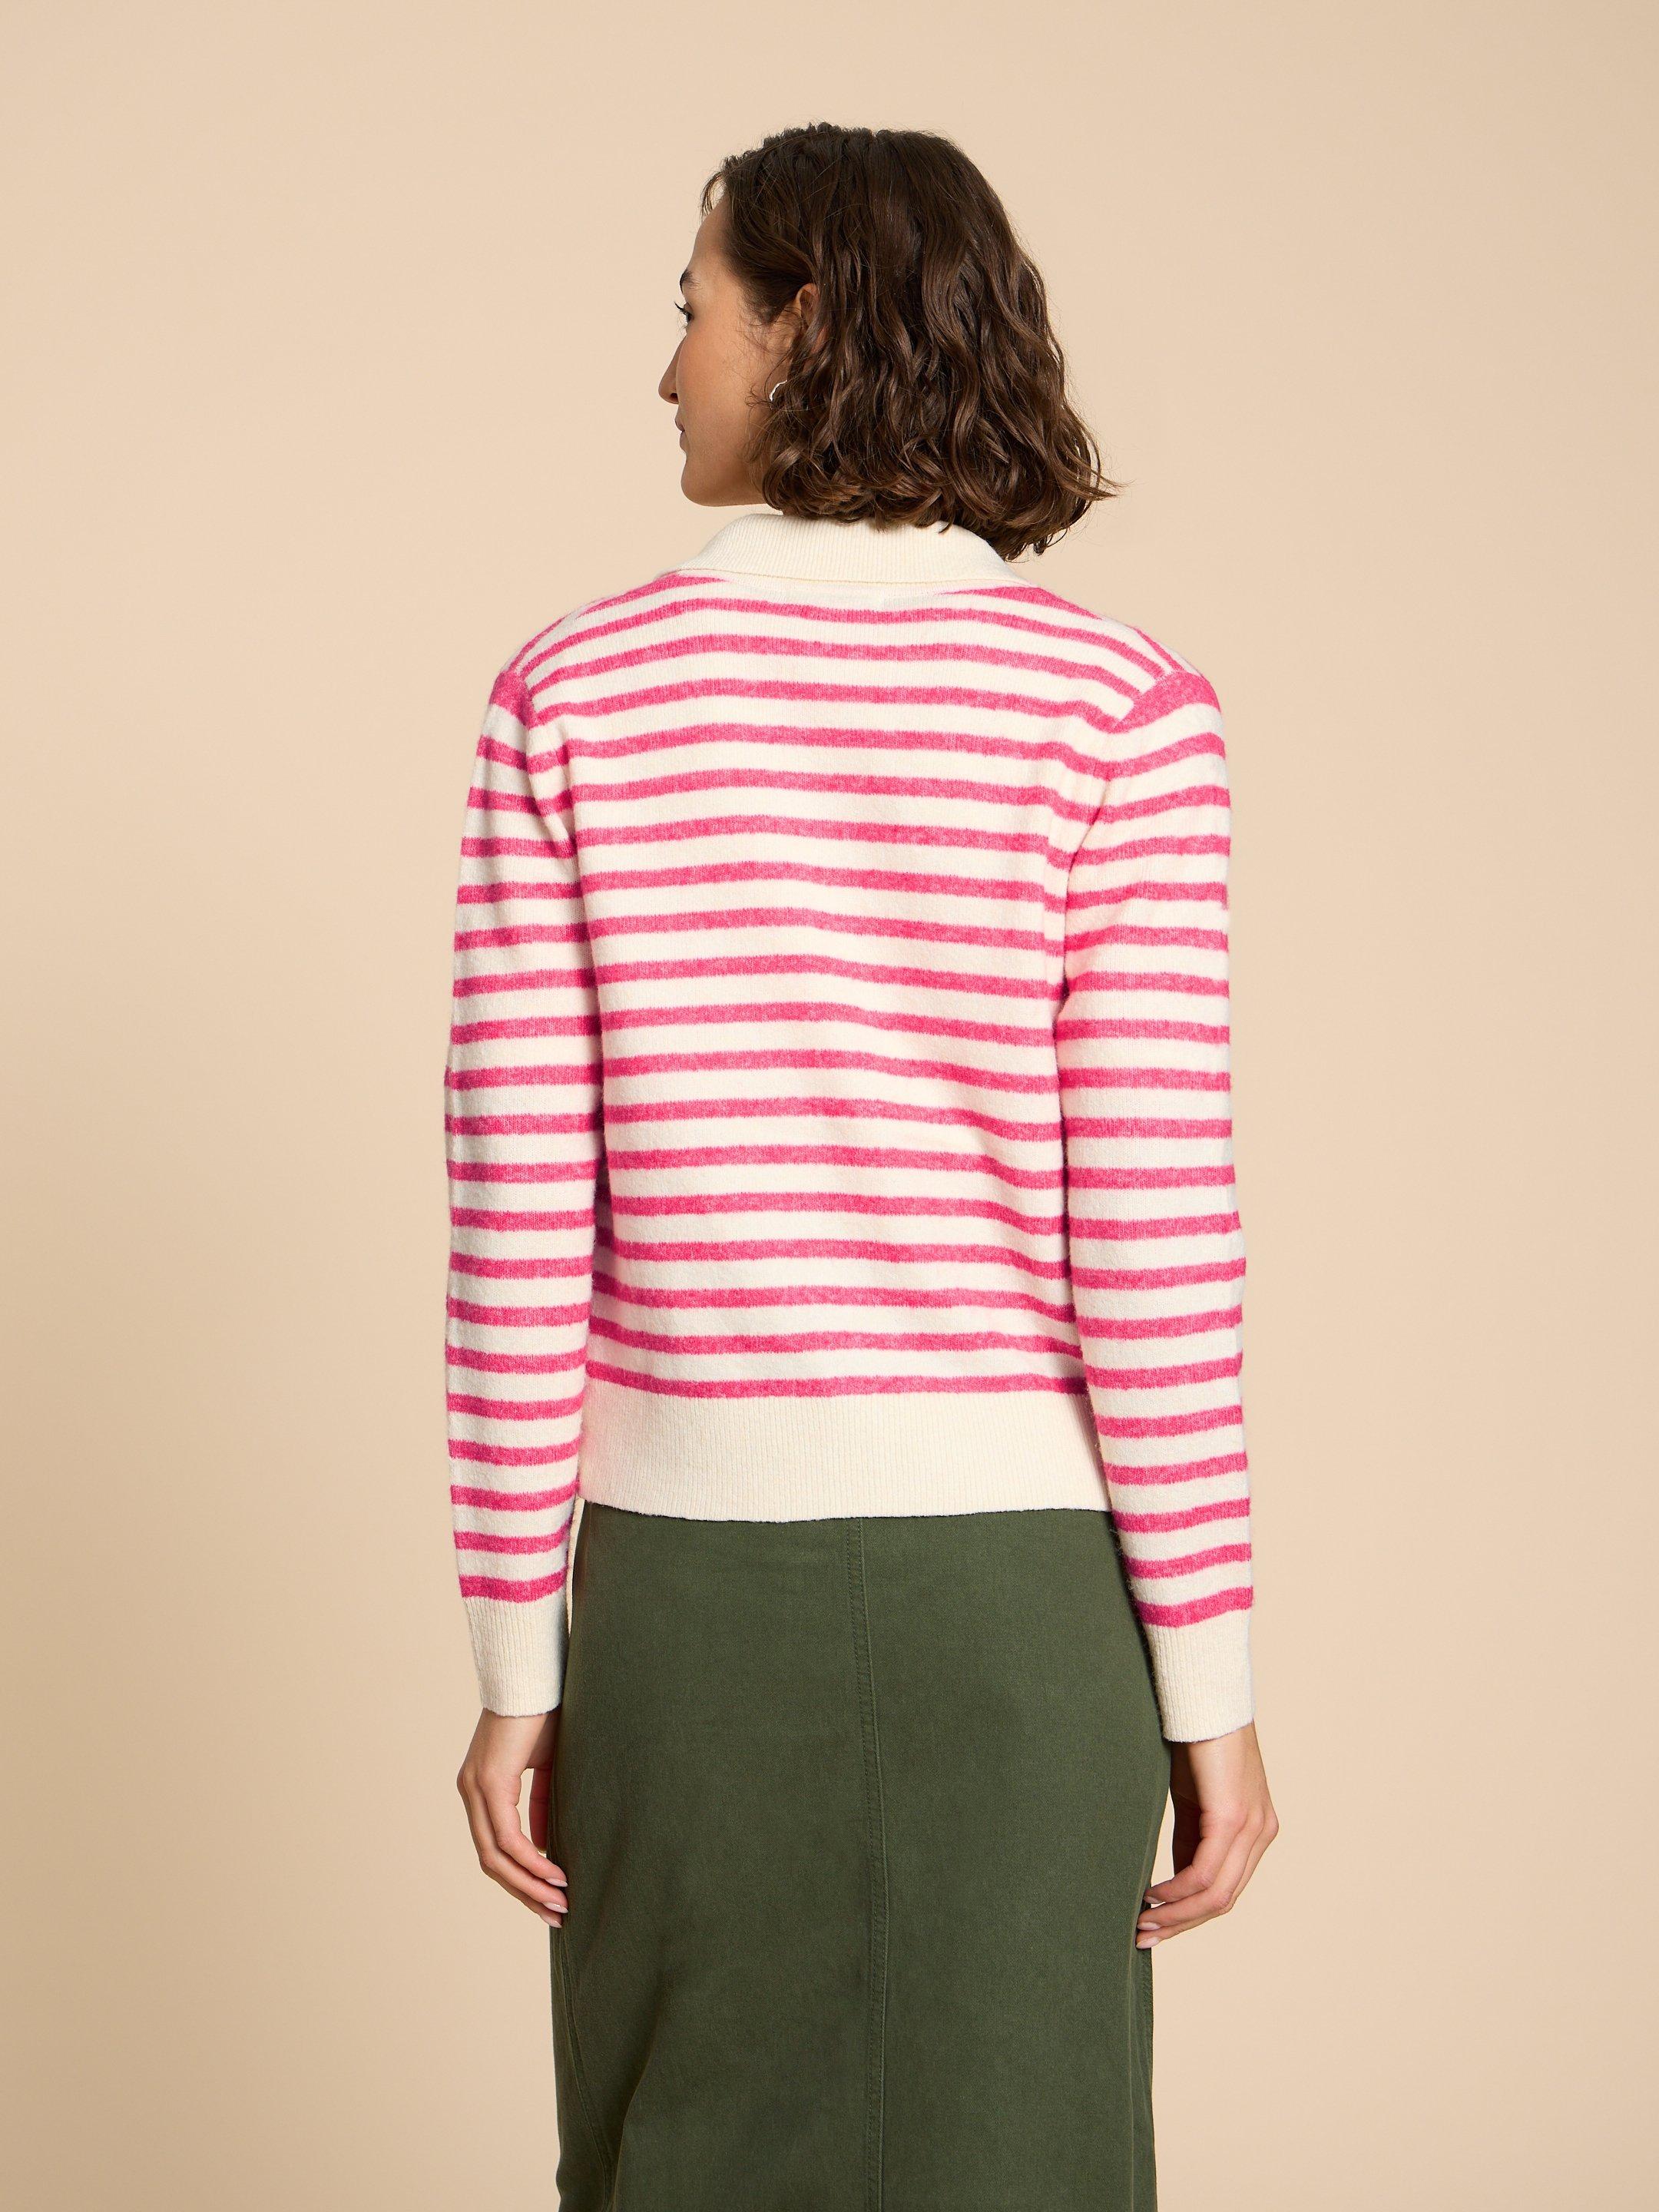 PEONY COLLARED CARDIGAN in PINK MLT - MODEL BACK